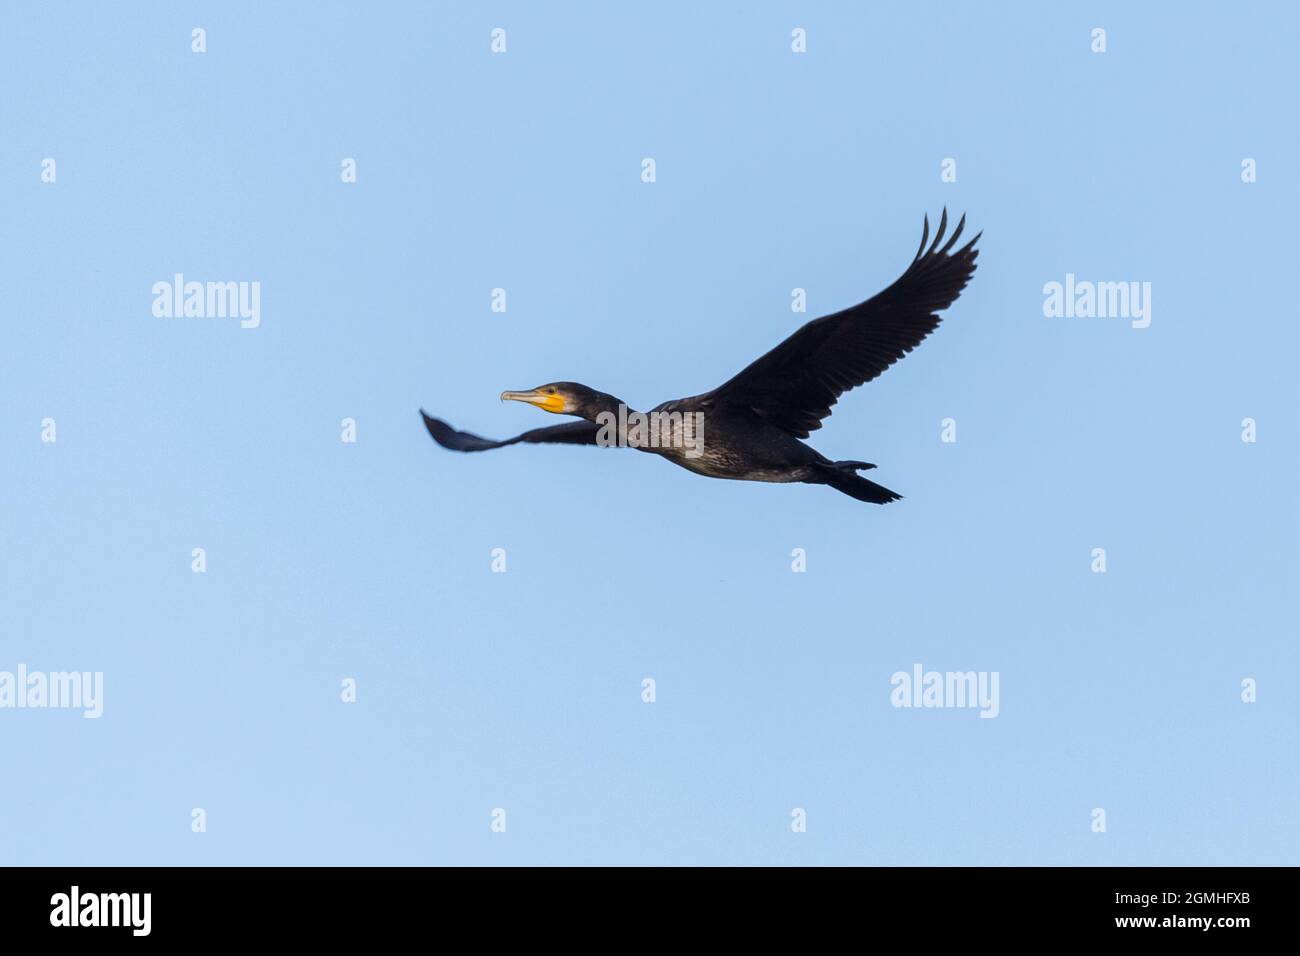 isolated great cormorant (phalacrocorax carbo) in flight in blue sky Stock Photo